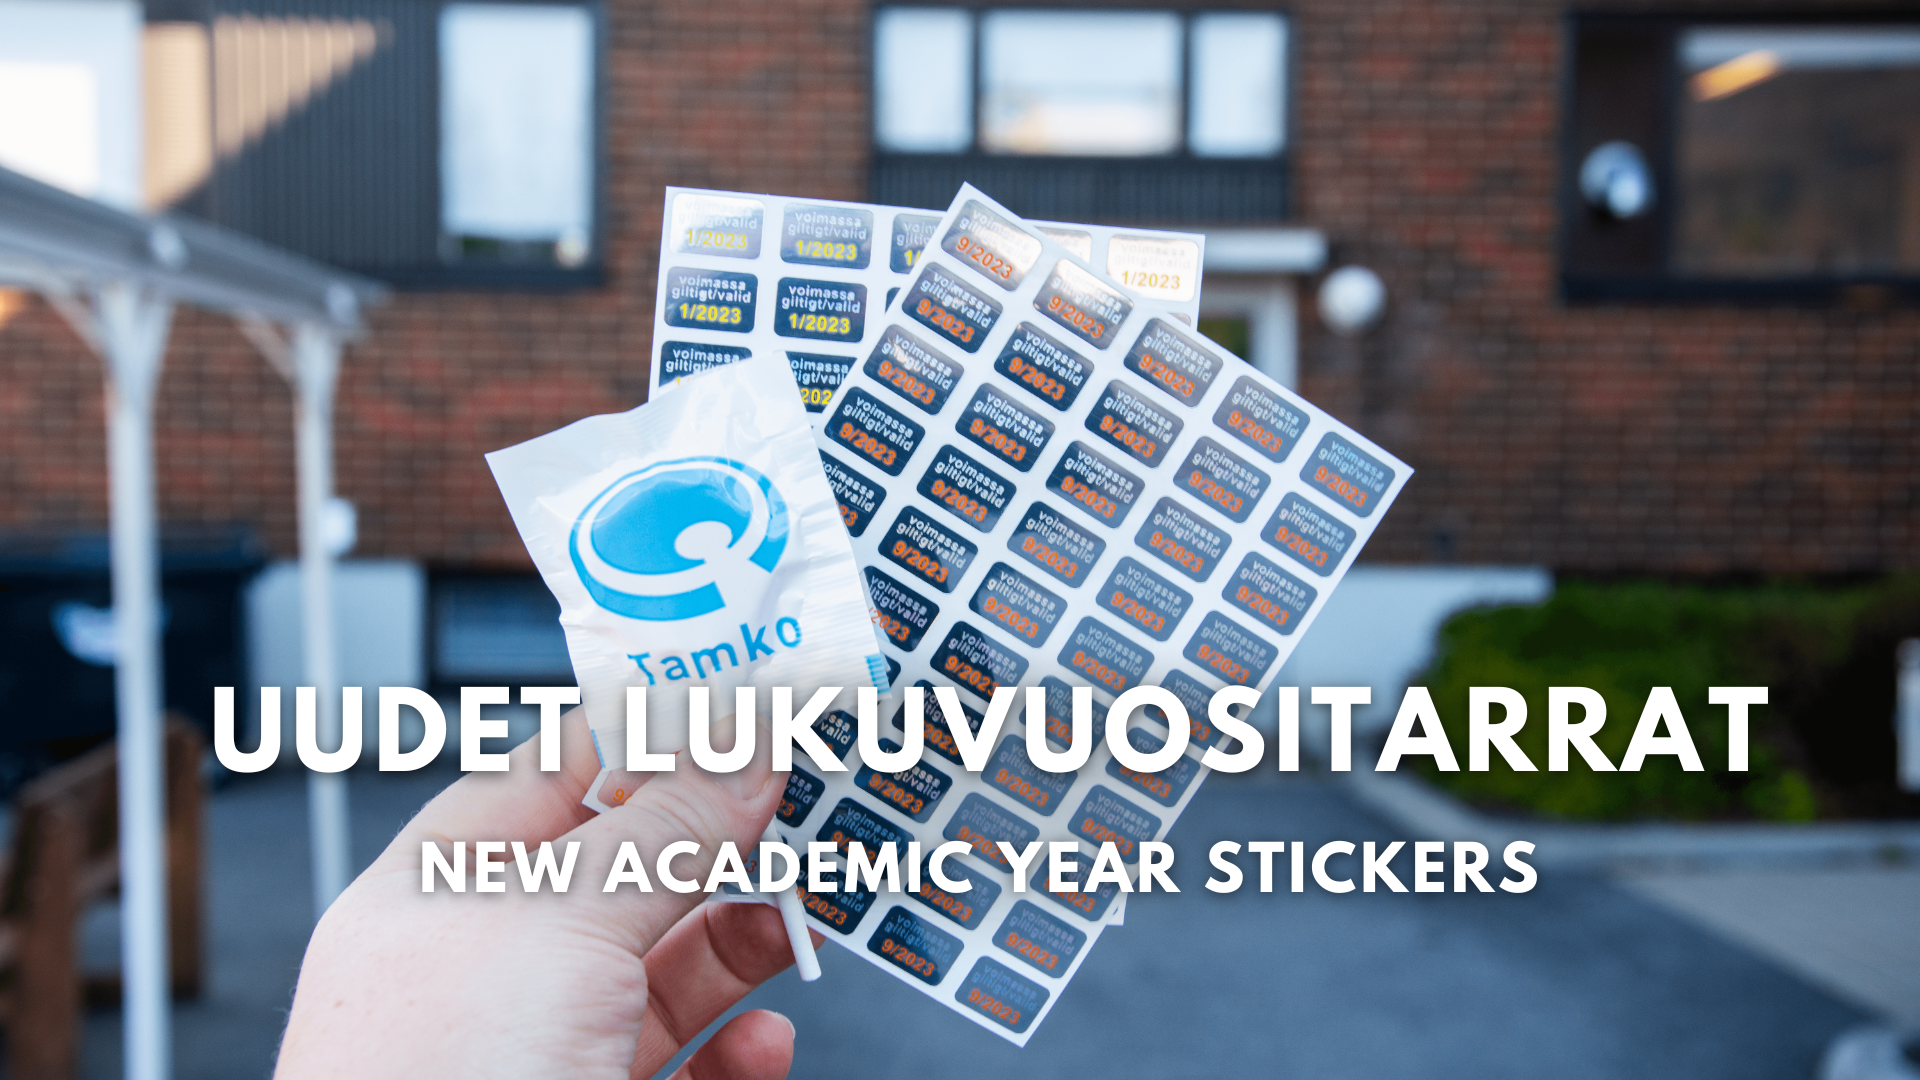 New academic year stickers for student cards